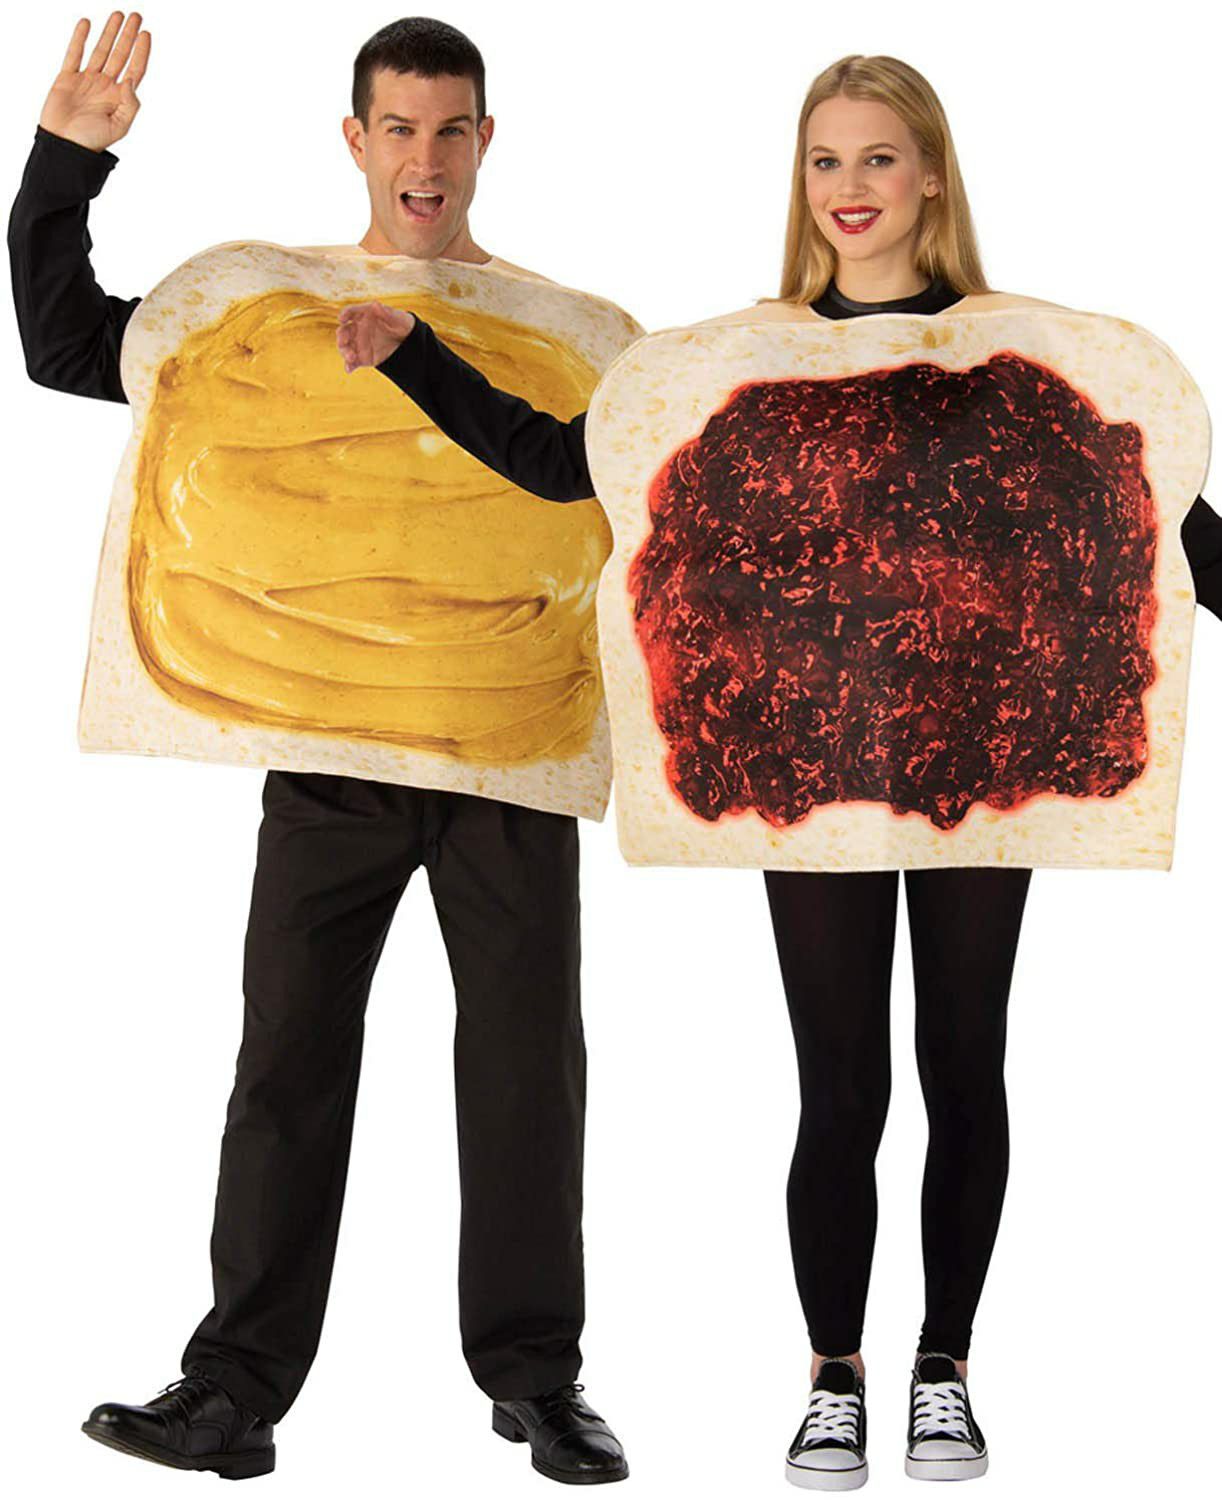 Peanut Butter and Jelly Couples Costume